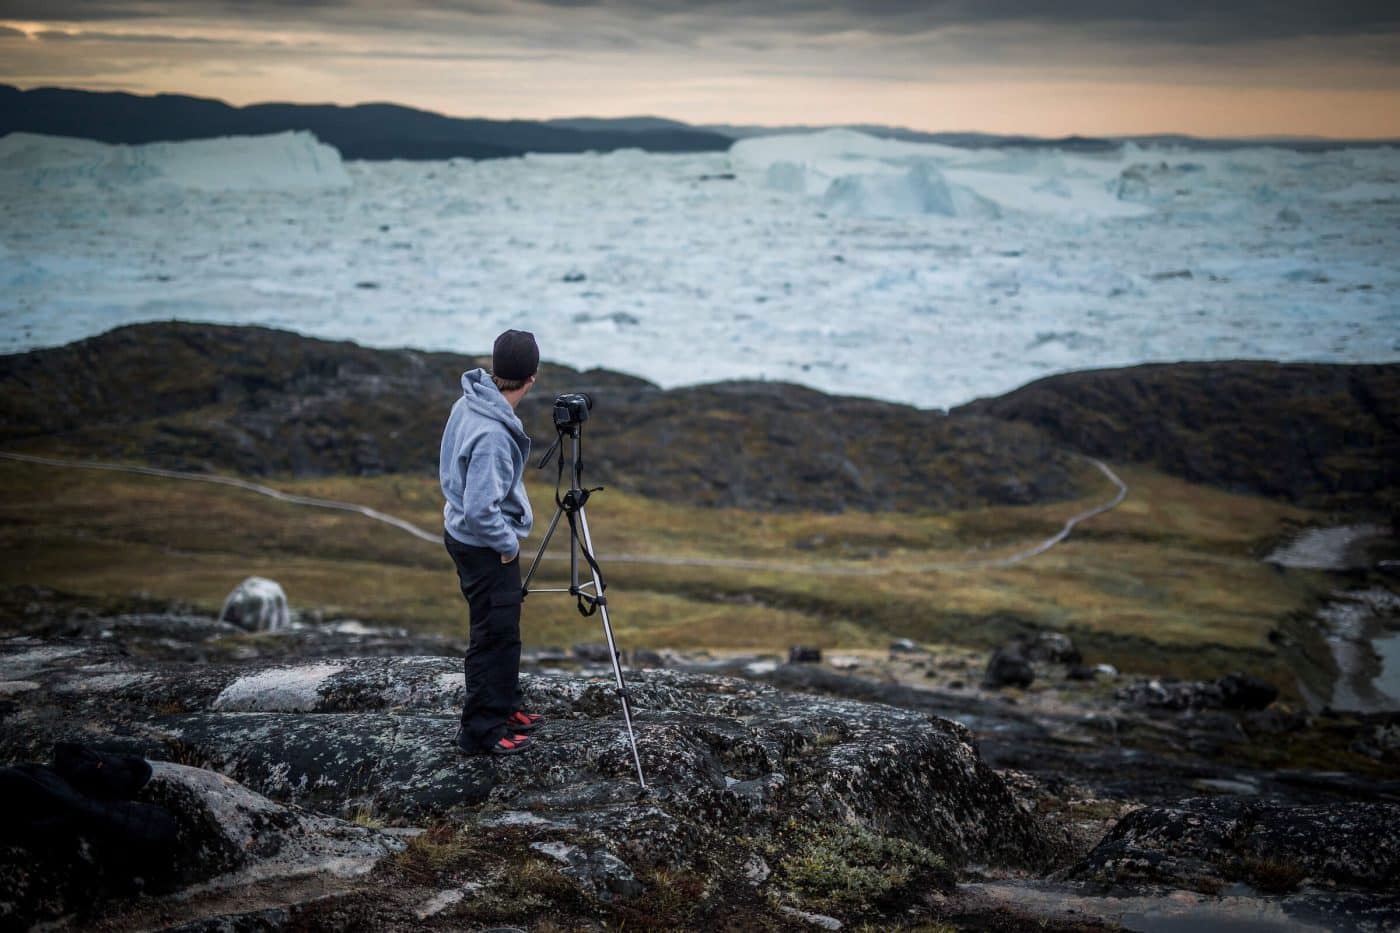 A photographer near the Ilulissat ice fjord in Greenland. By Mads Pihl